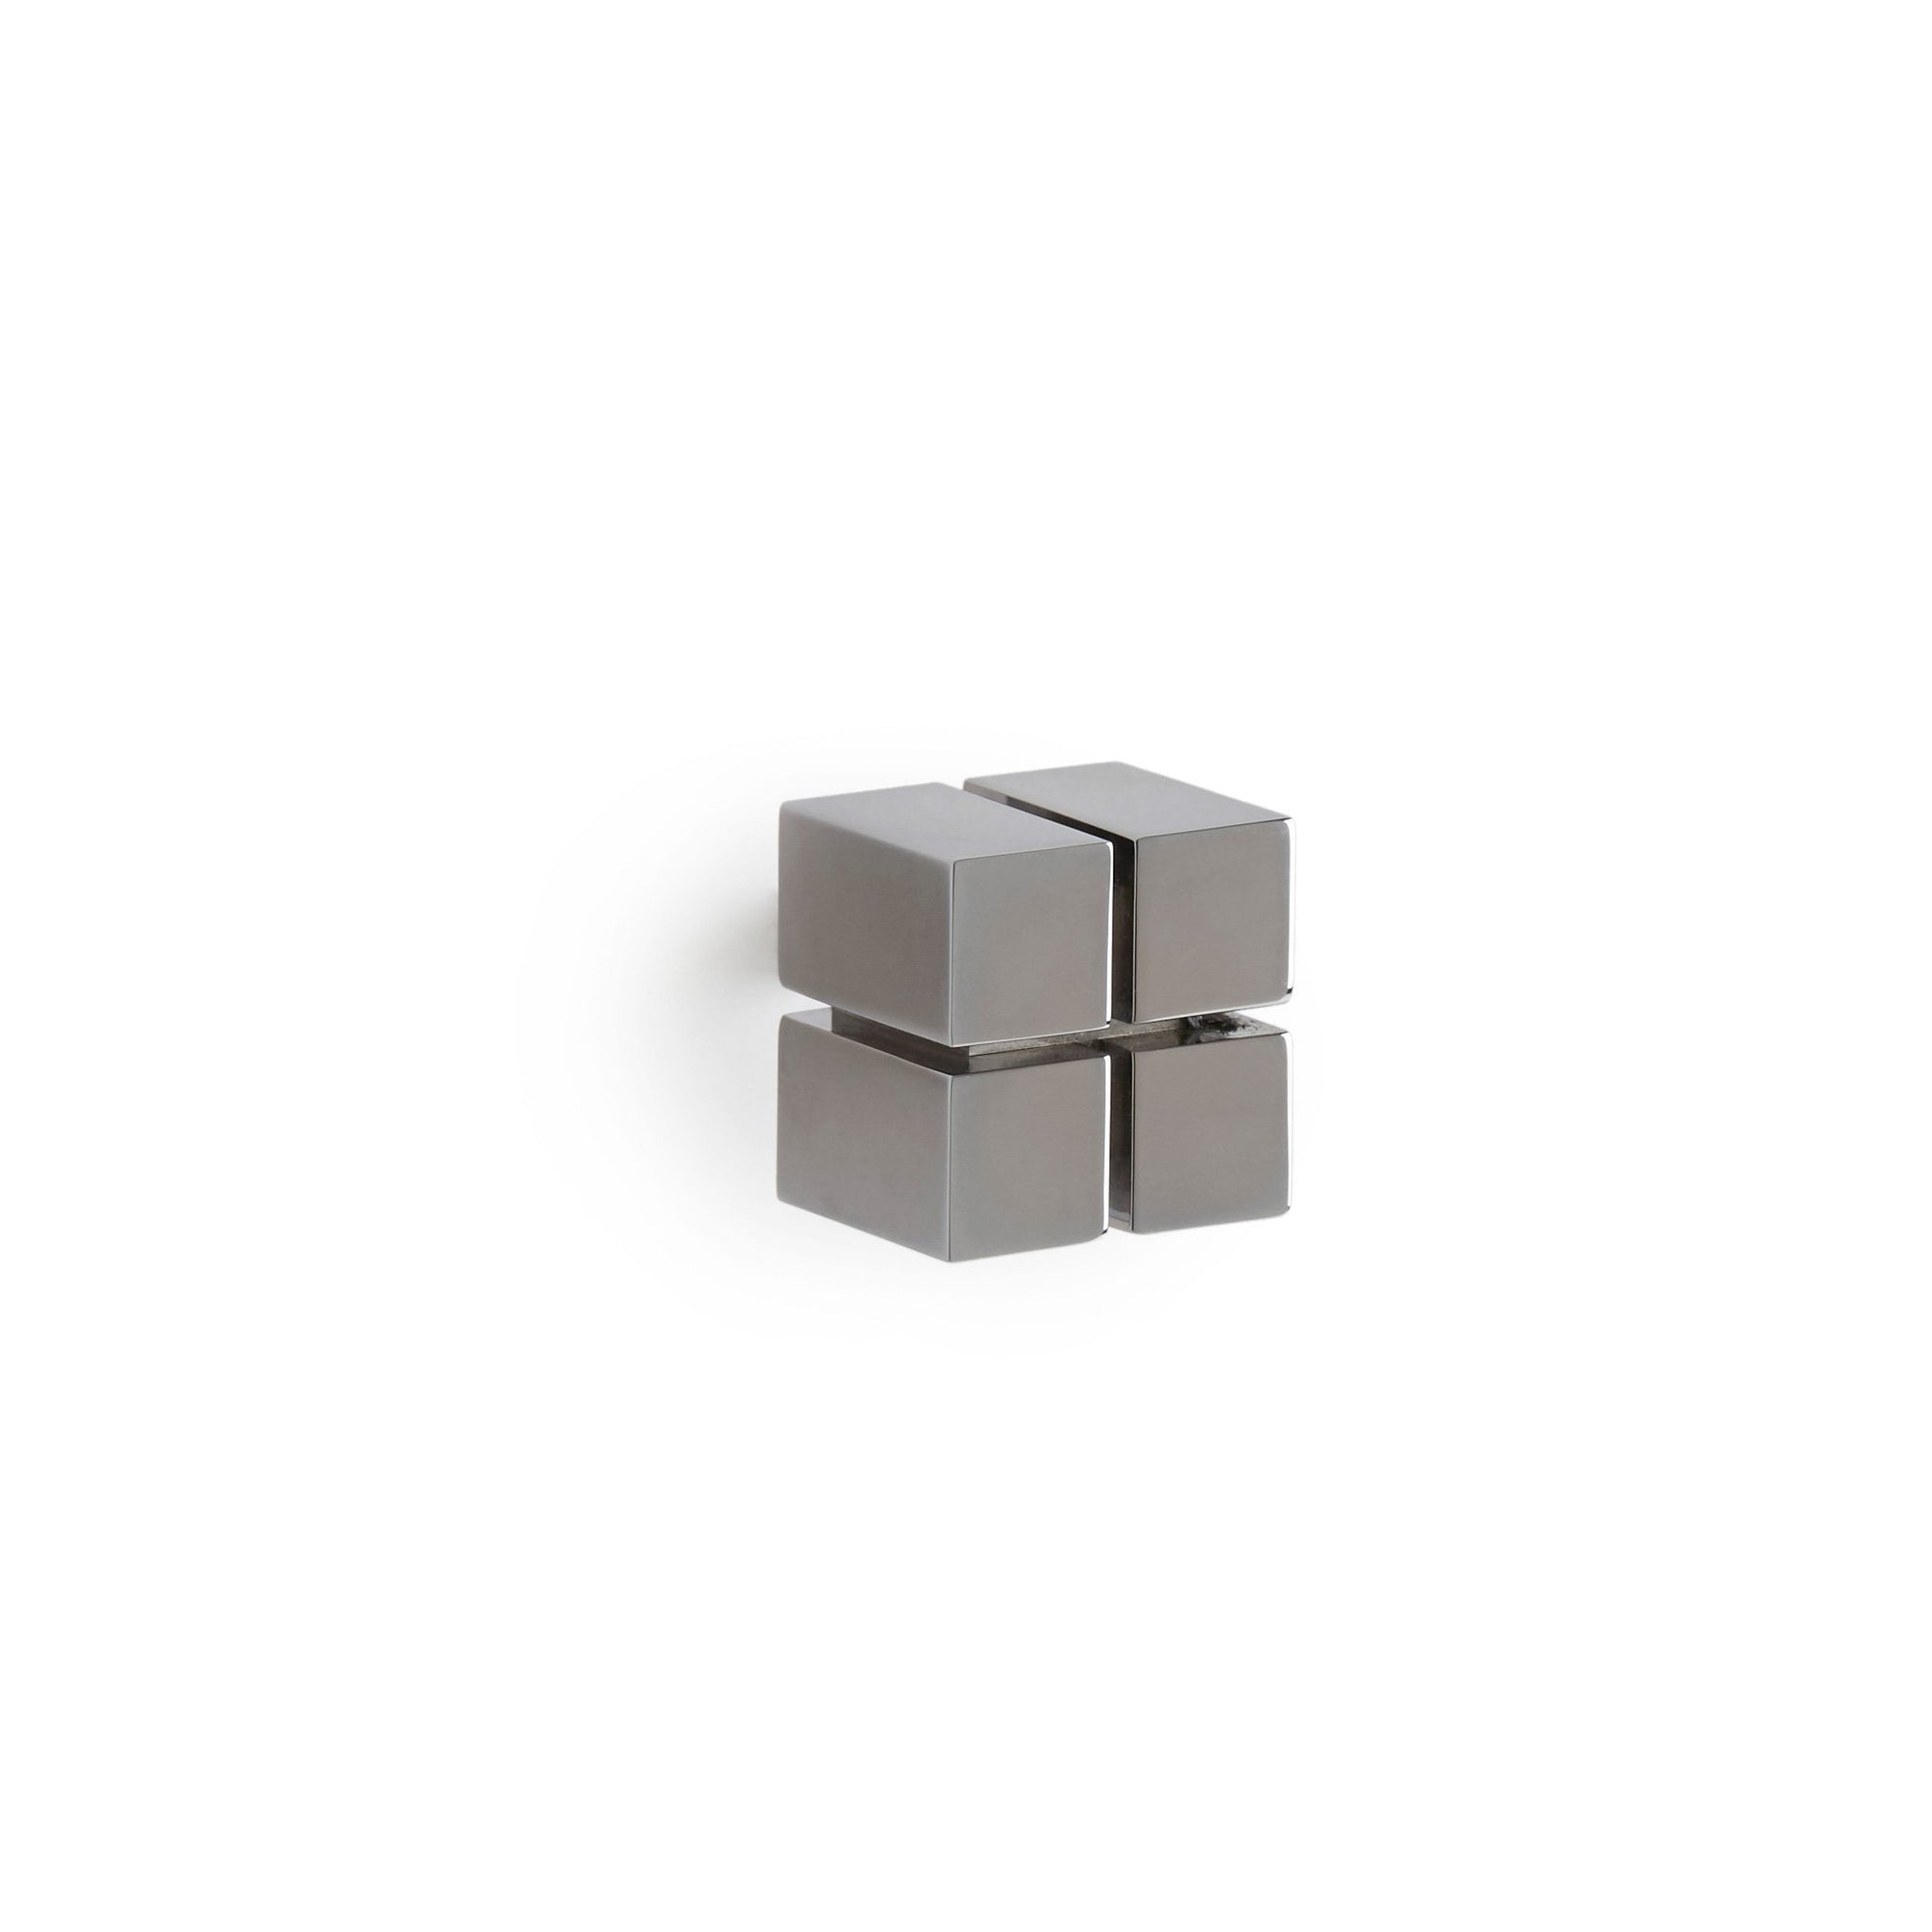 2003A-CP Sherle Wagner International Quad Cabinet & Drawer Knob in Polished Chrome metal finish